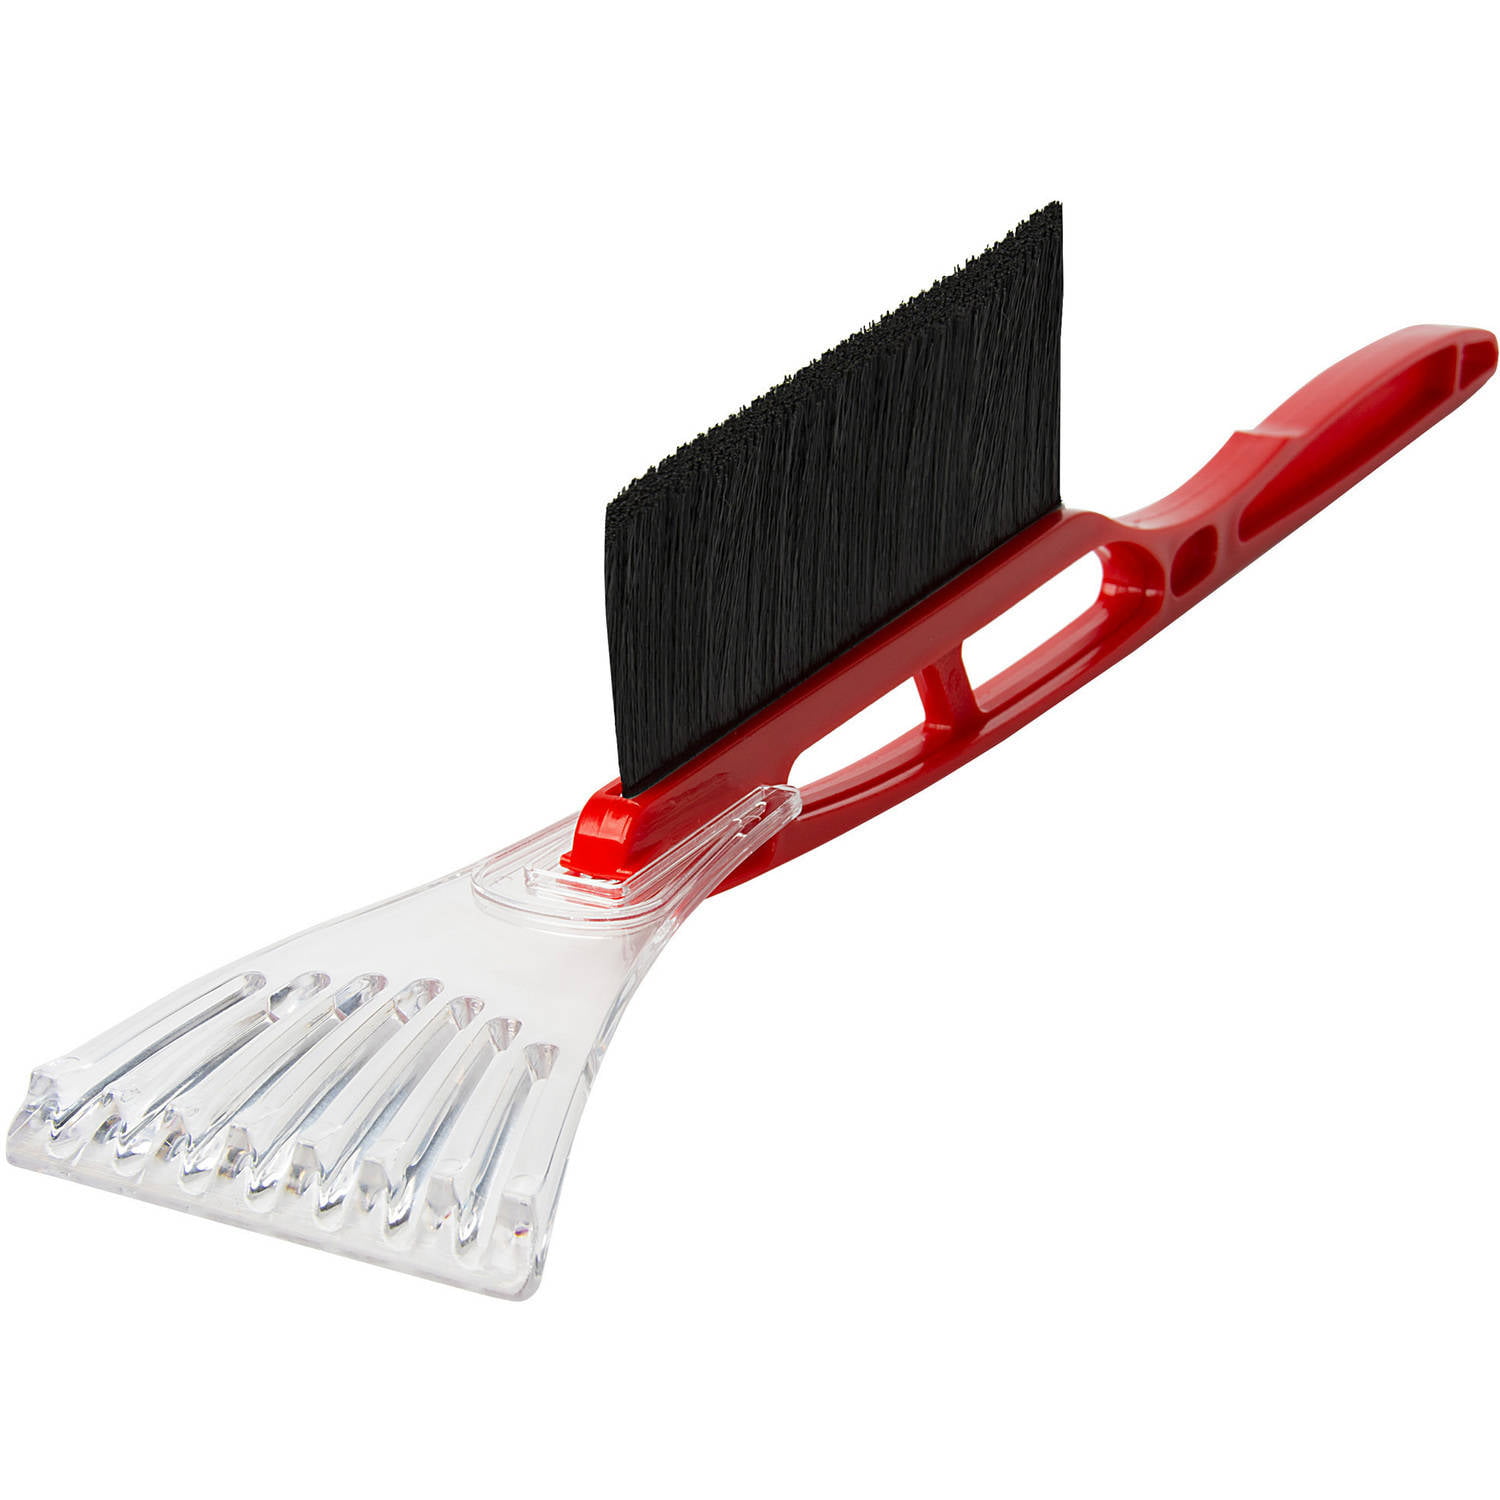 Red ALEKO ICB02RED Tough Ice Scraper with Snow Brush Long Handle Durable No-Scratch Scraper Defroster 